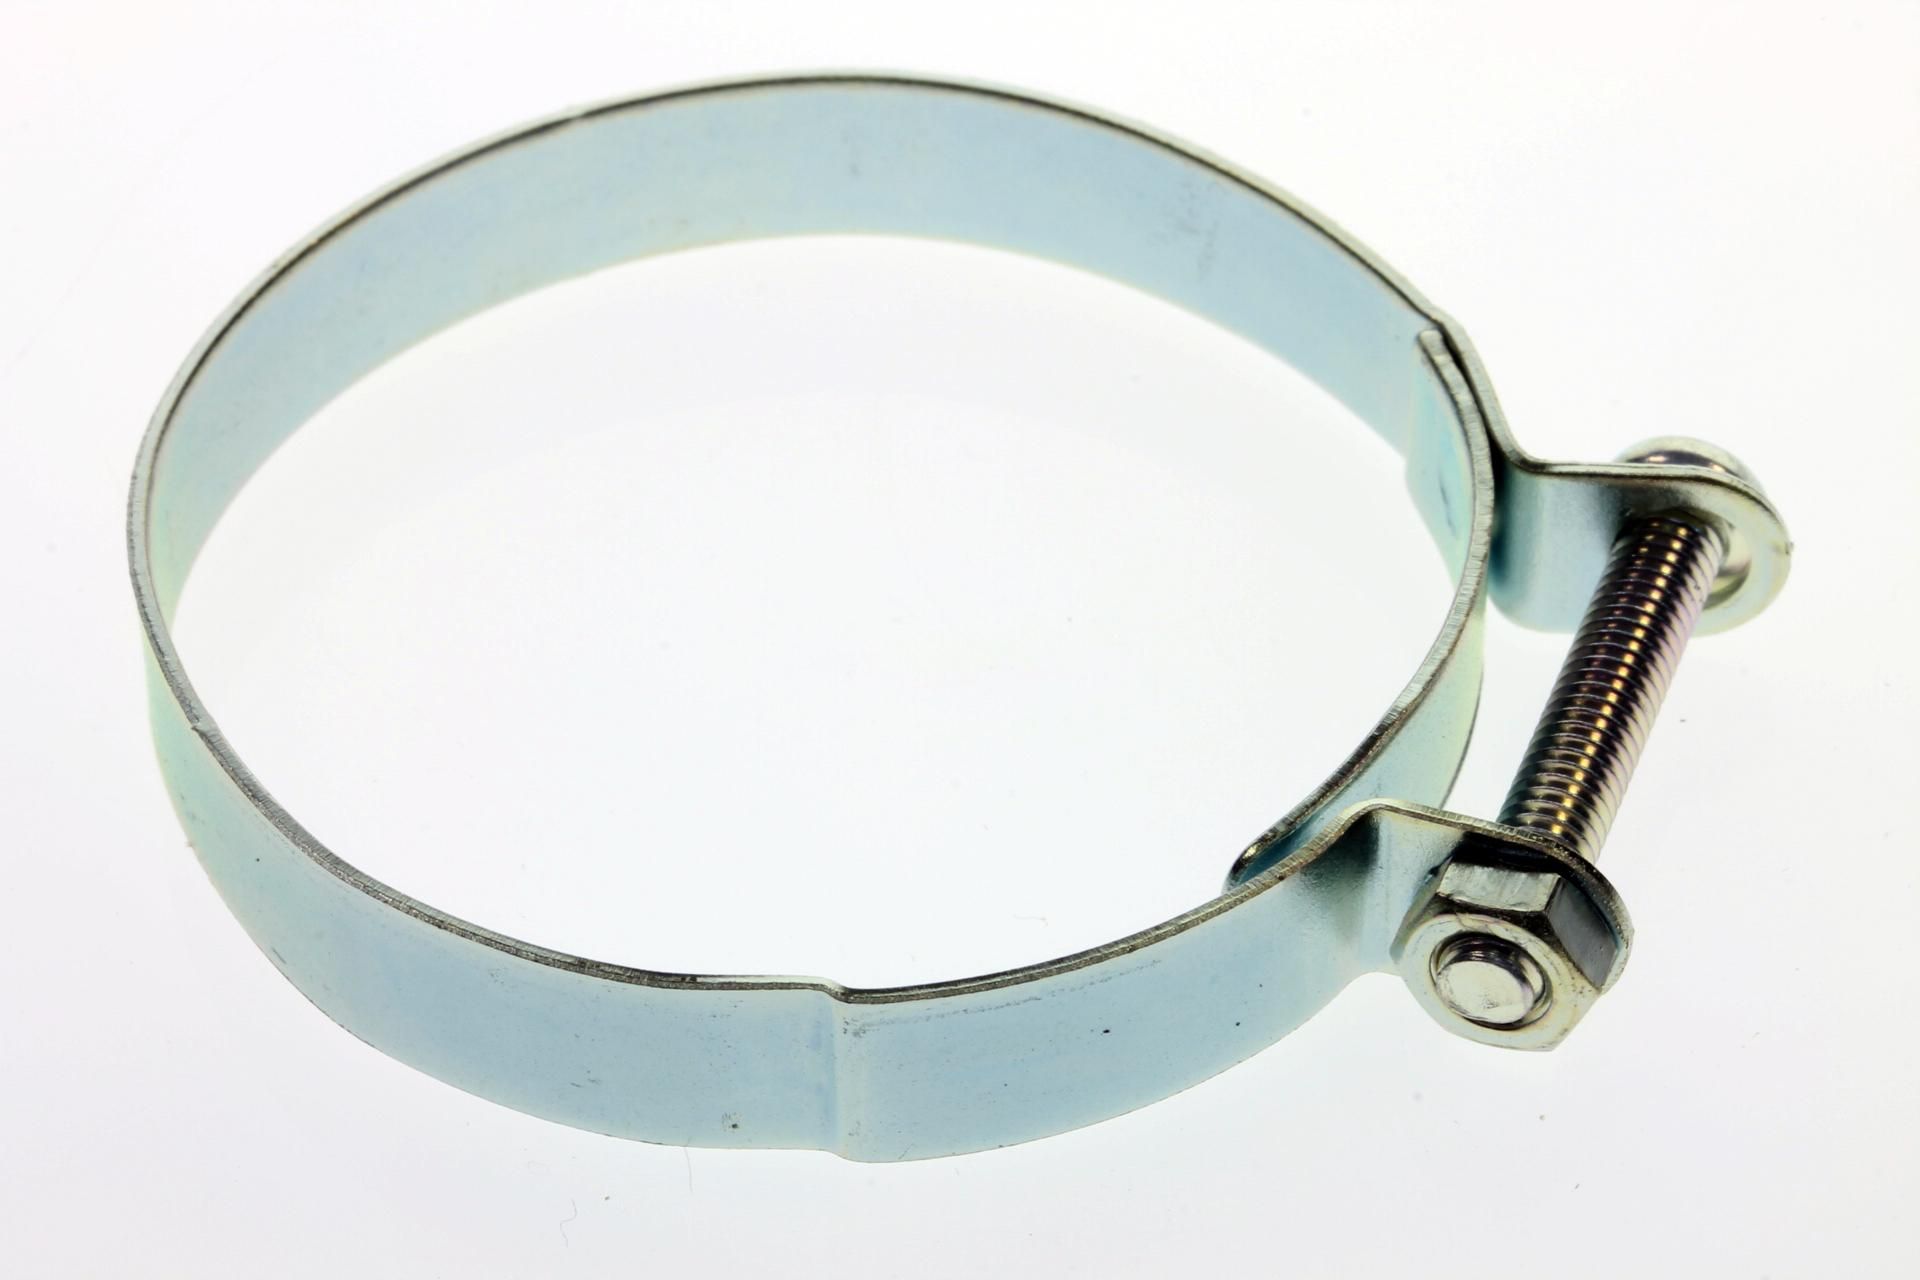 90460-45104-00 Superseded by 90450-45075-00 - HOSE CLAMP ASSY